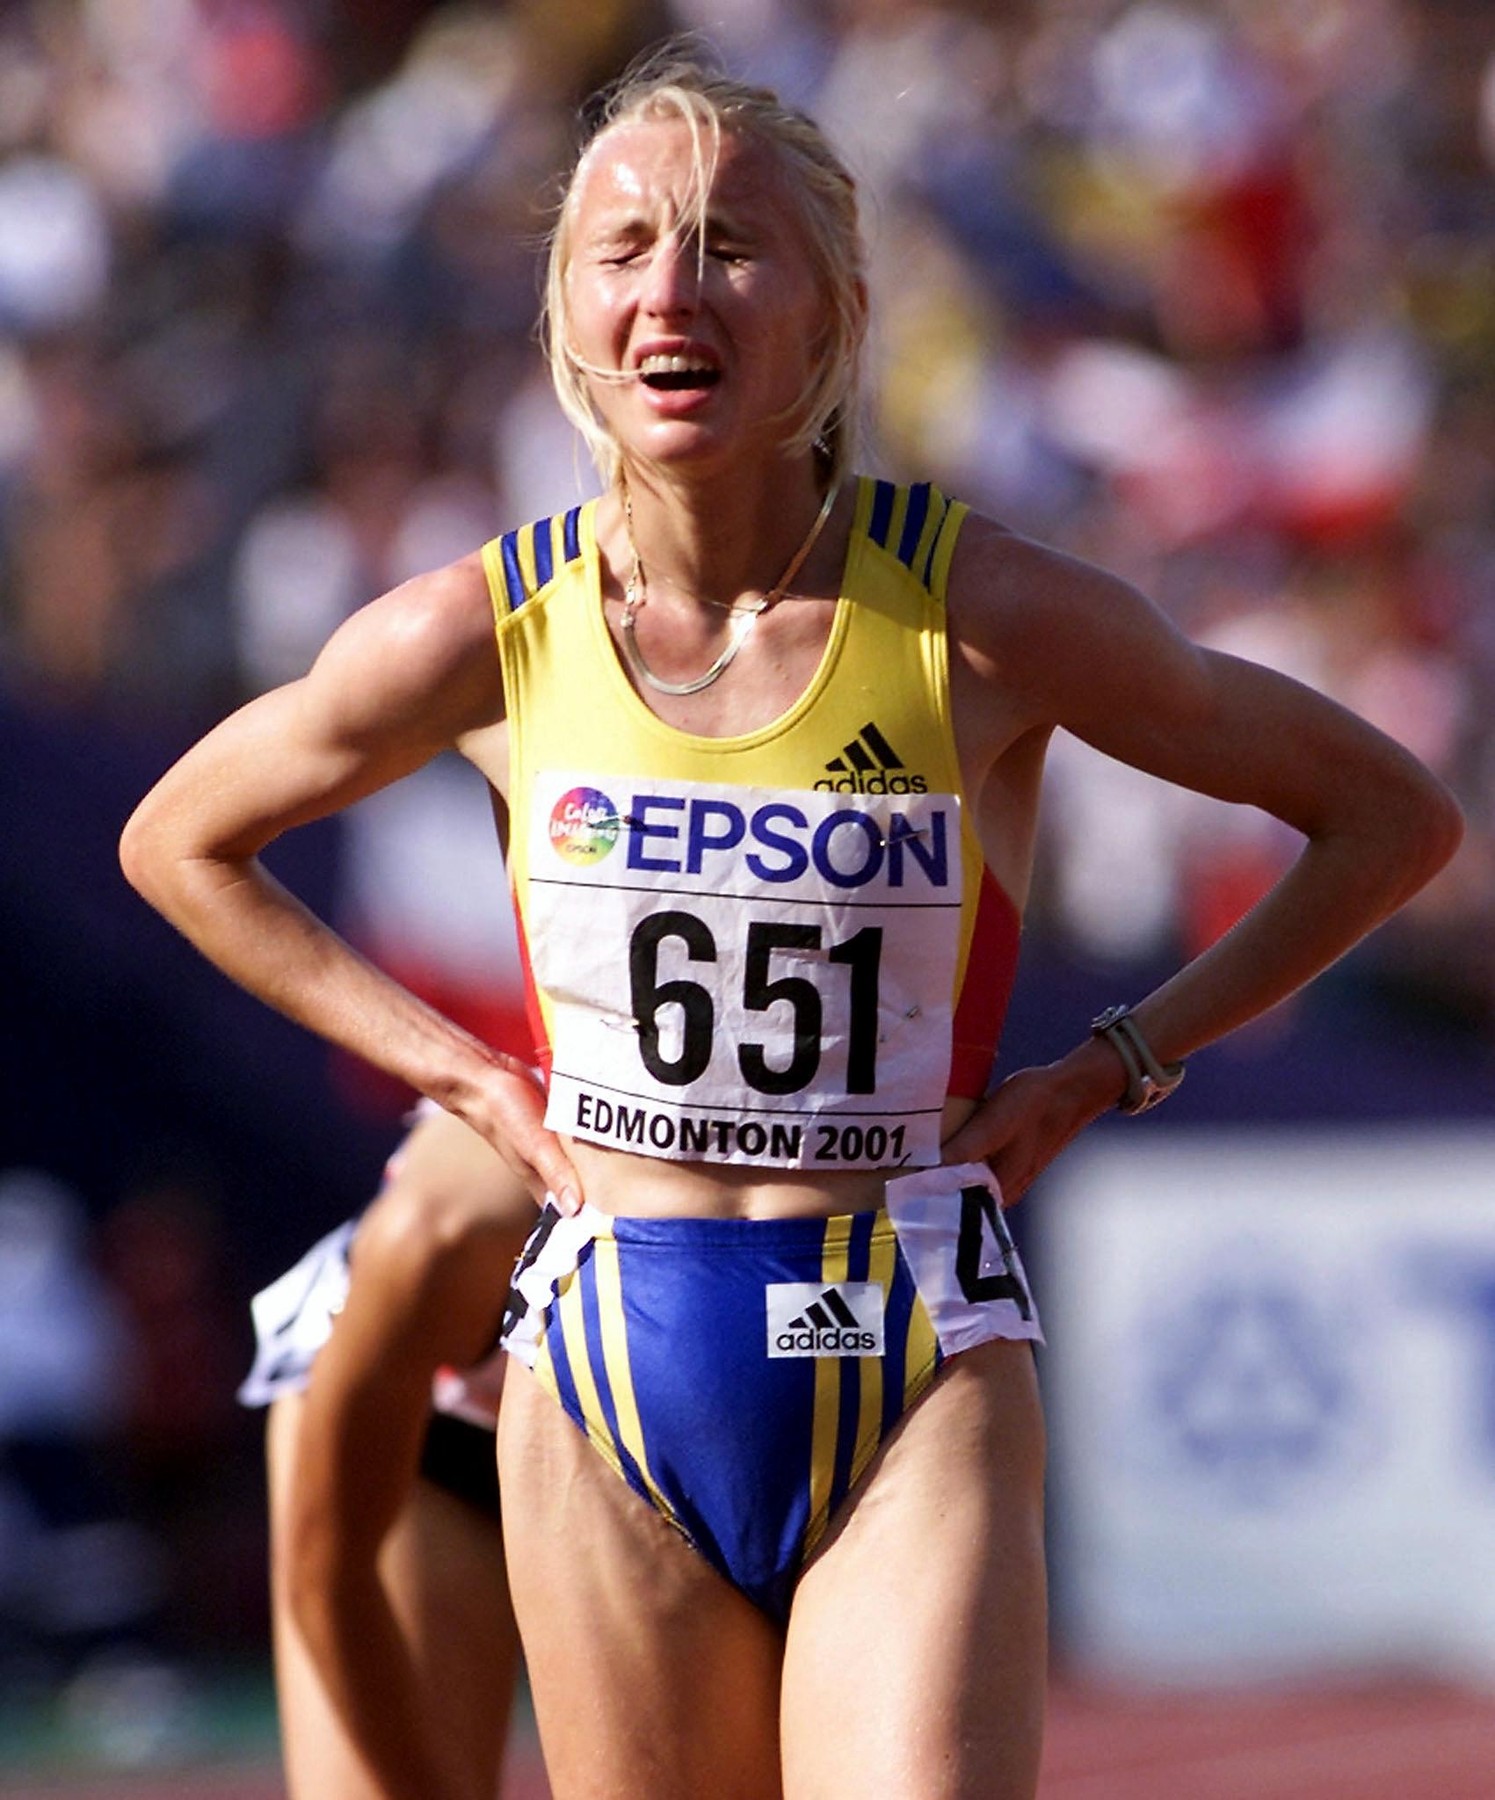 Gabriela Szabo of Romania agonizes over her 8th-place finish in the women's 5000M final at the 8th World Championships in Athletics 11 August 2001 in Commonwealth Stadium in Edmonton, Canada. Szabo's rival, Olga Yegorova of russia, won the gold medal in 15:03.39.,Image: 17497260, License: Rights-managed, Restrictions: , Model Release: no, Credit line: Profimedia